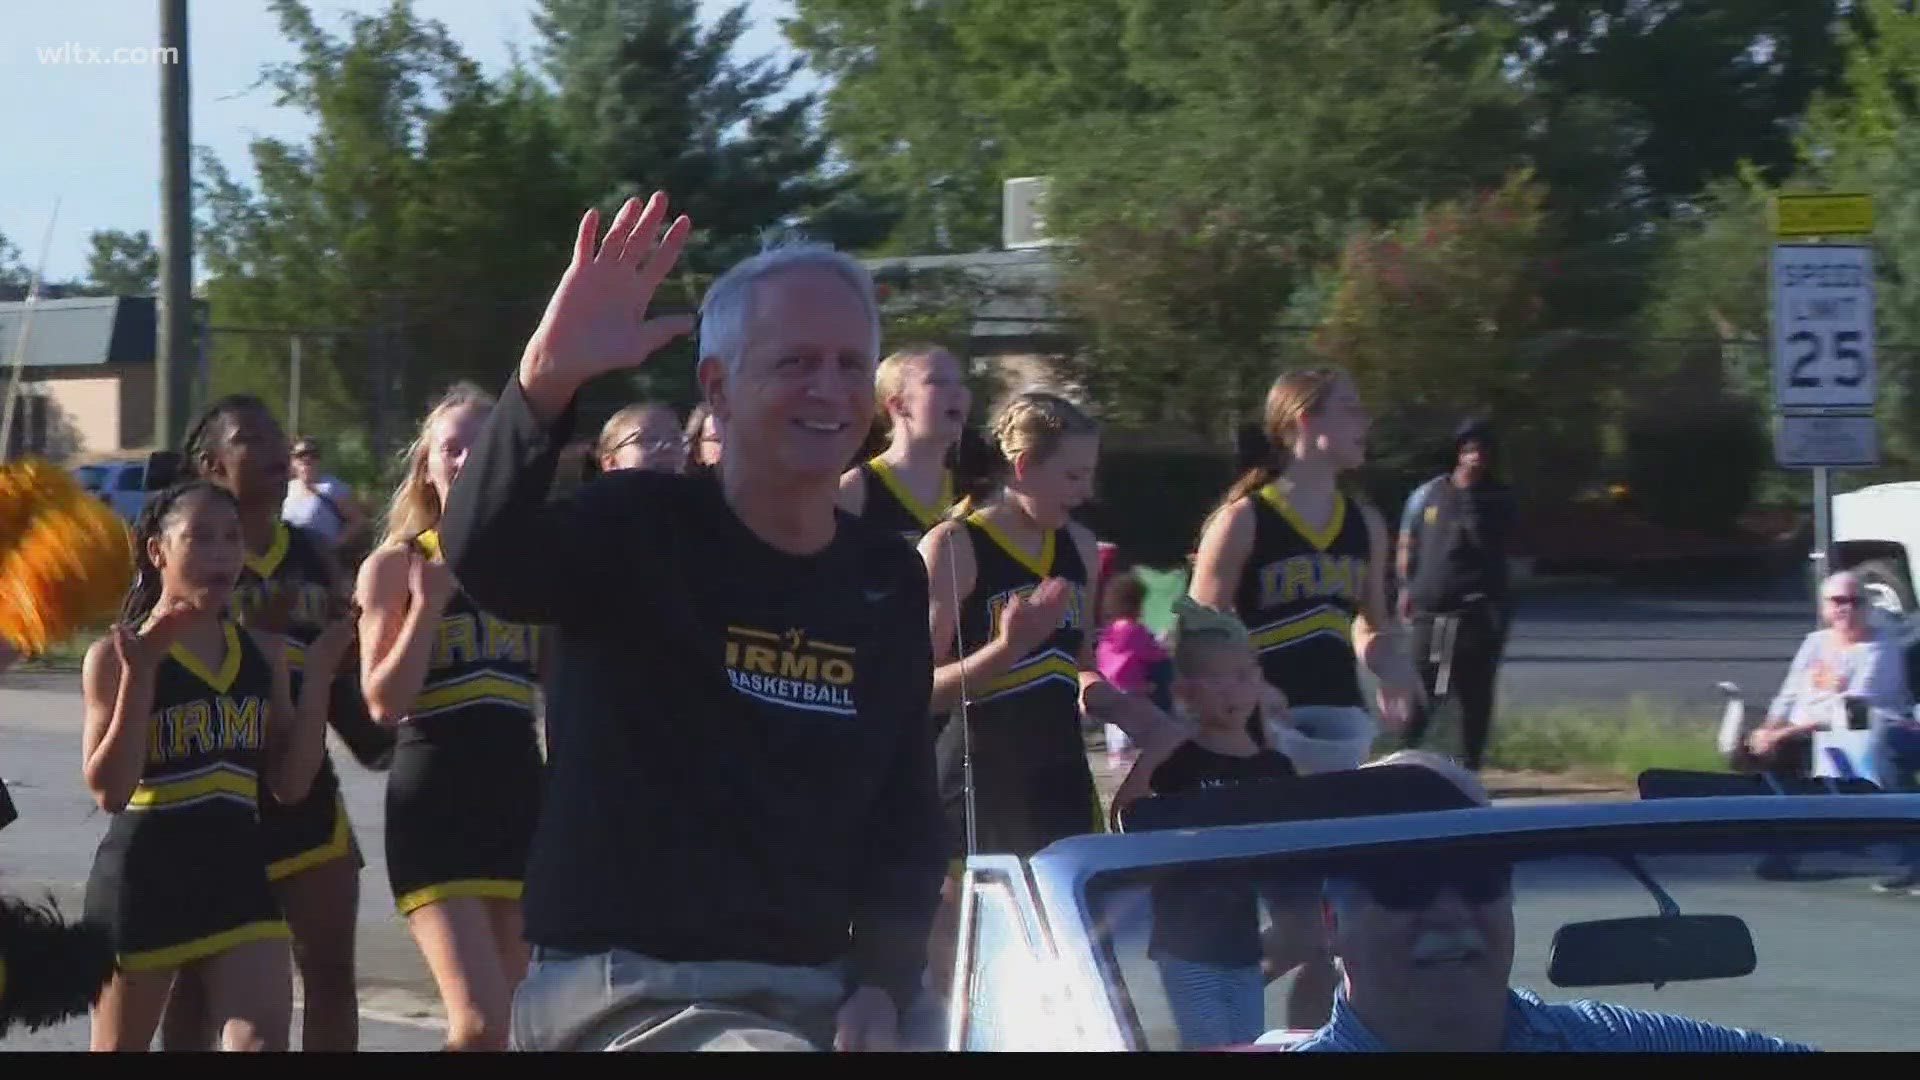 Irmo head boys basketball coach Tim Whipple spent his Saturday morning riding down St. Andrews in a convertible as part of his duties as Okra Strut Grand Marshal.